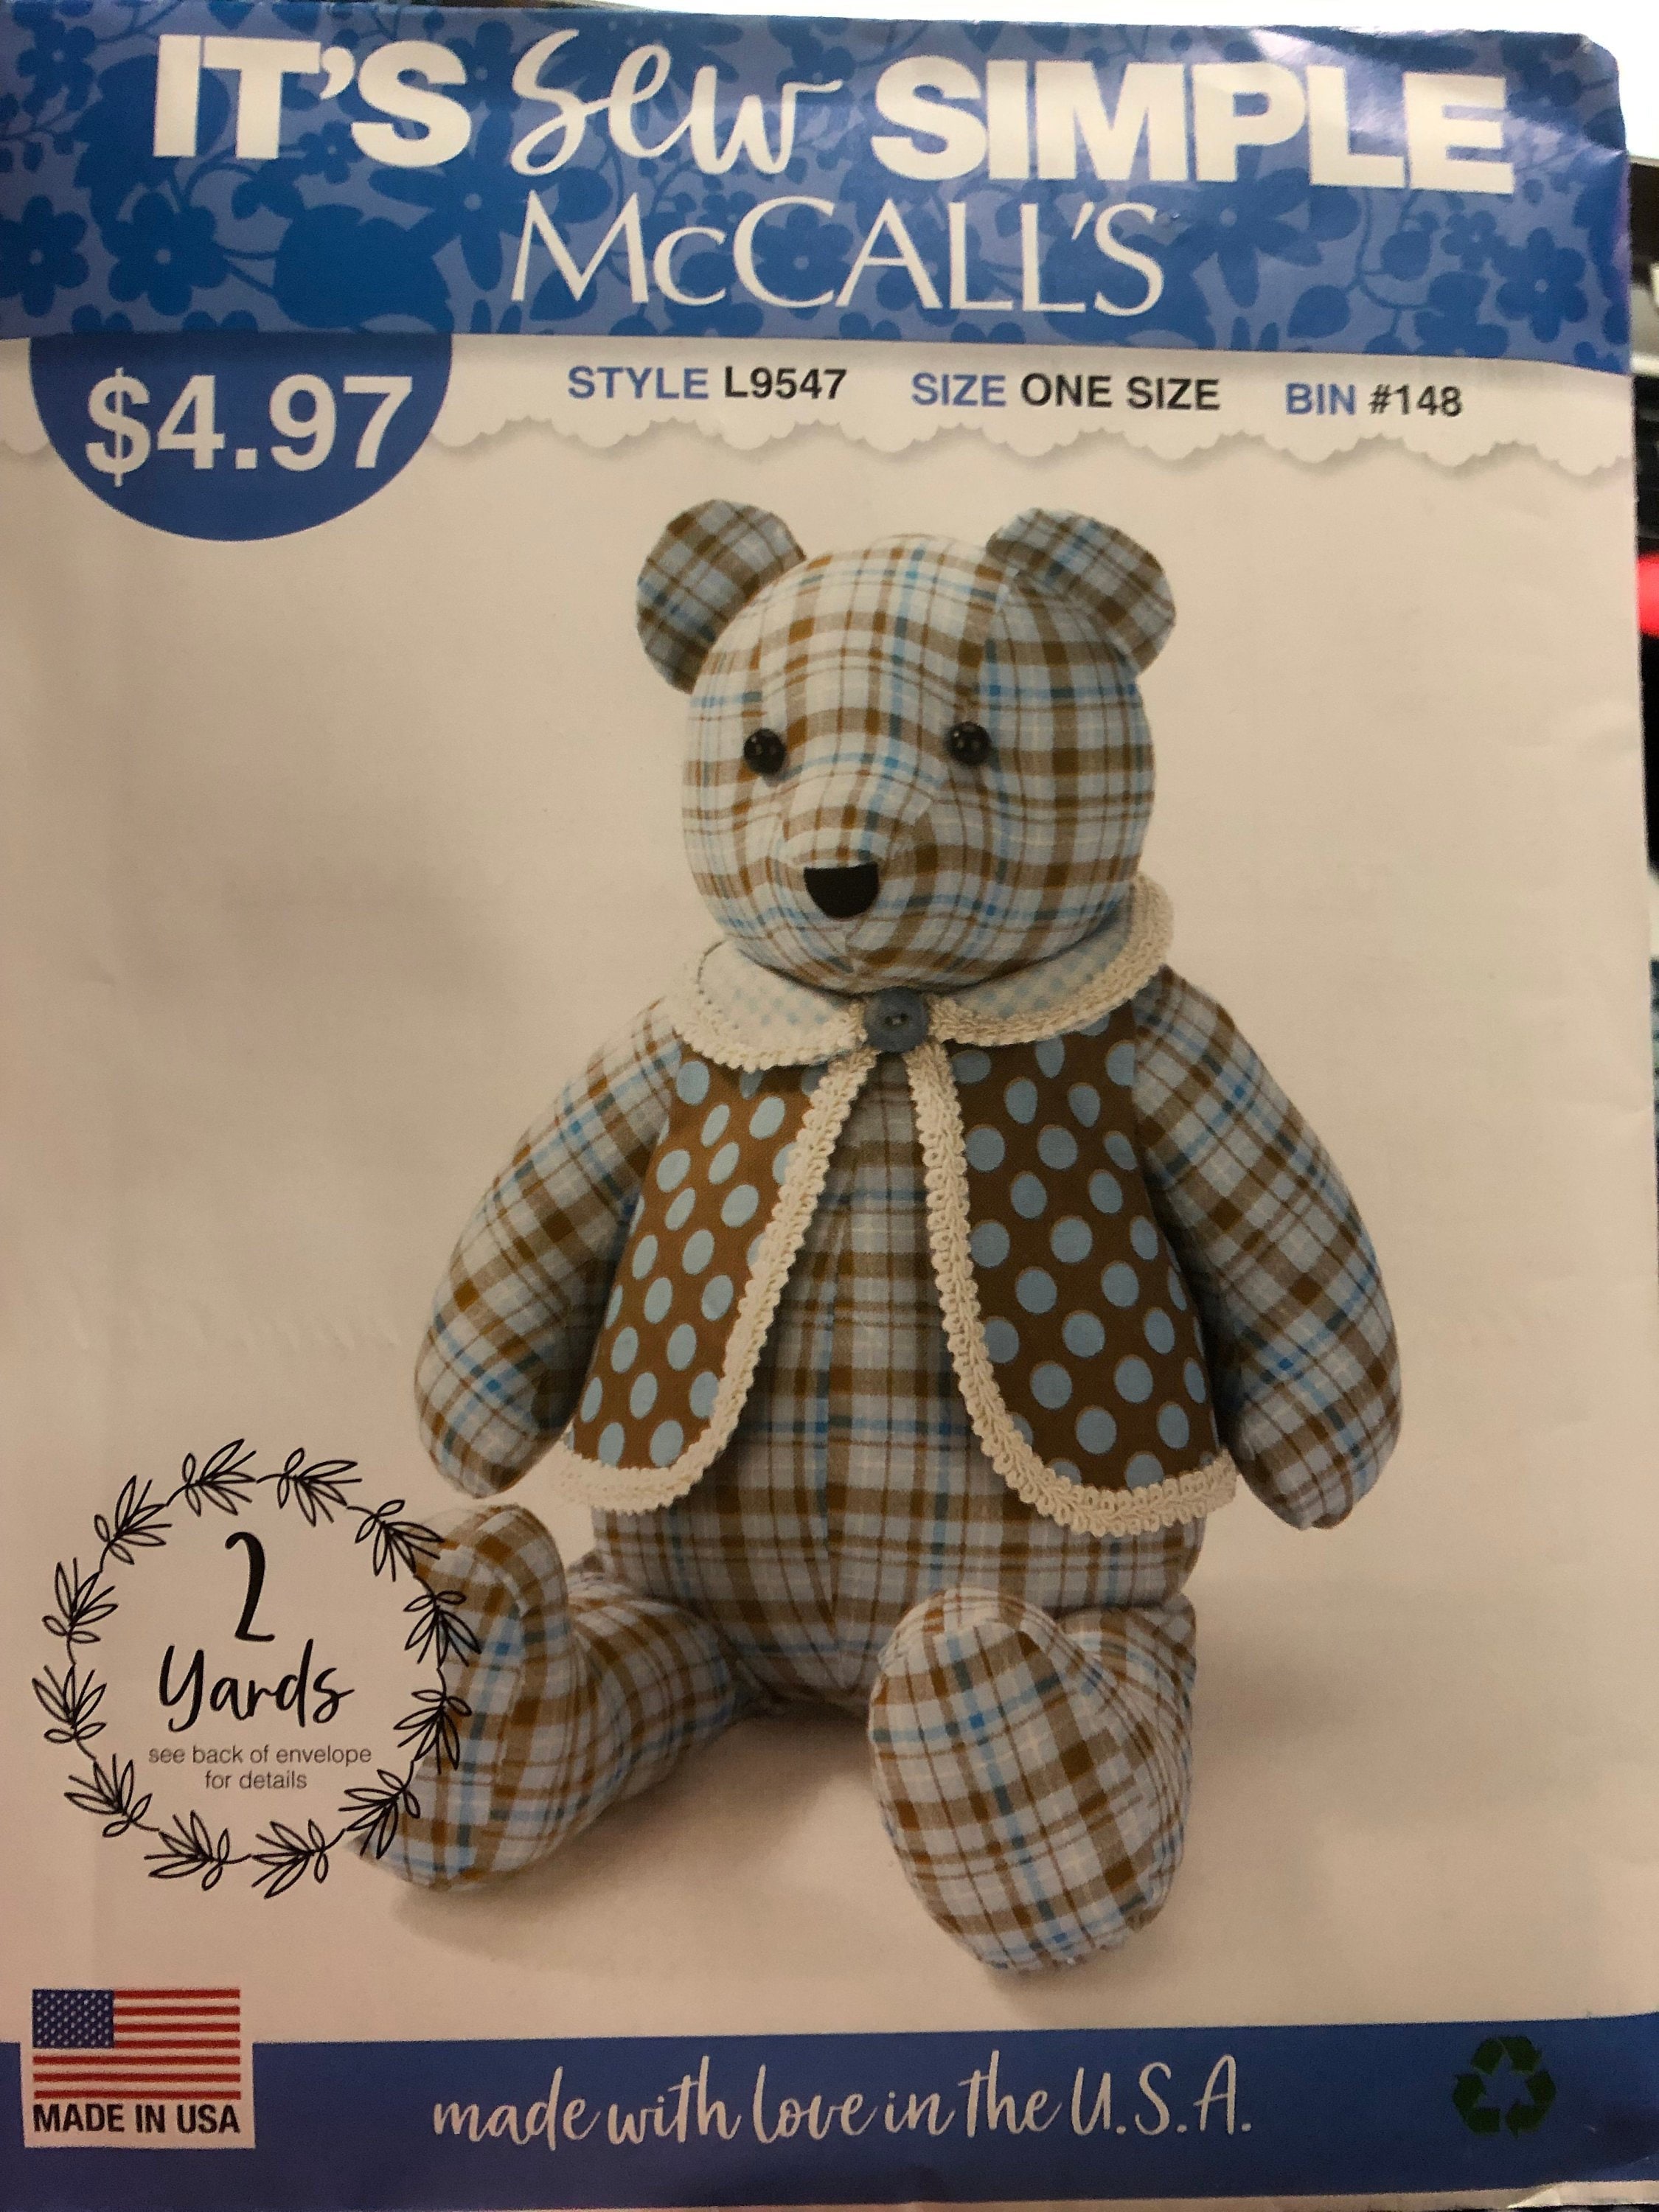 20+ of the cutest teddy bear sewing patterns - Swoodson Says